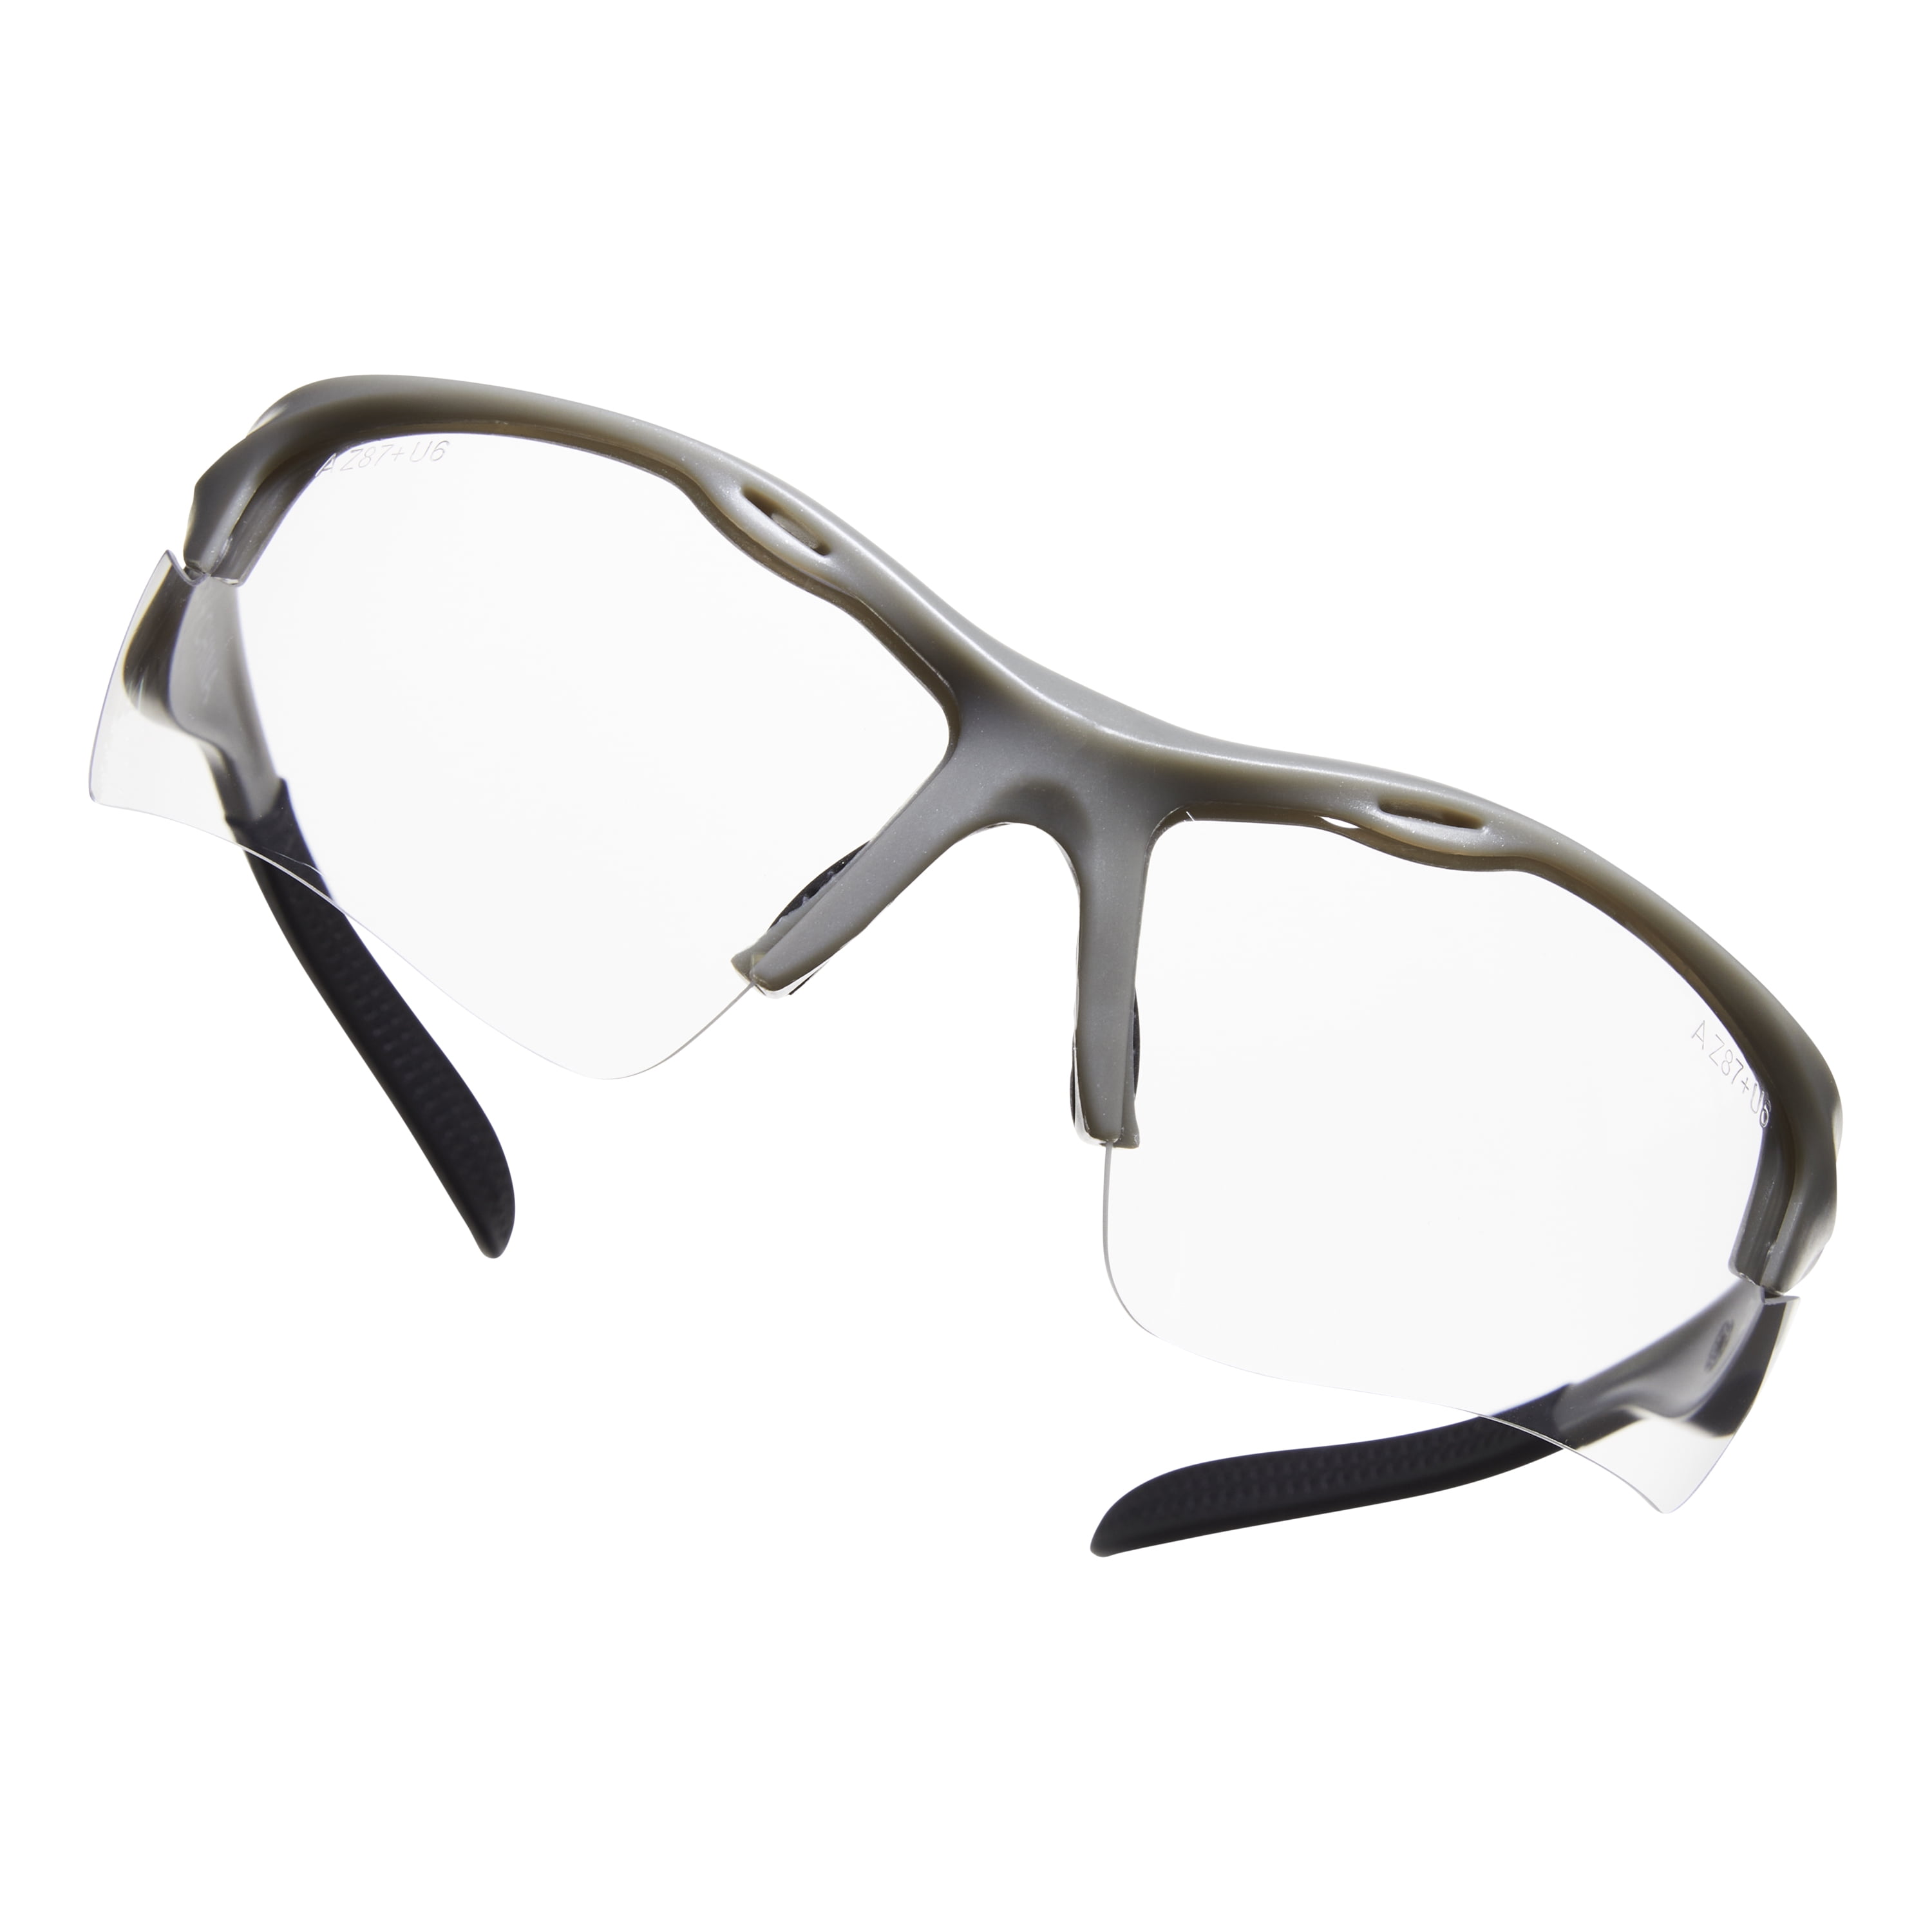 Allen Factor Shooting Glasses Clear Lens Clear Frame with Orange Tips 